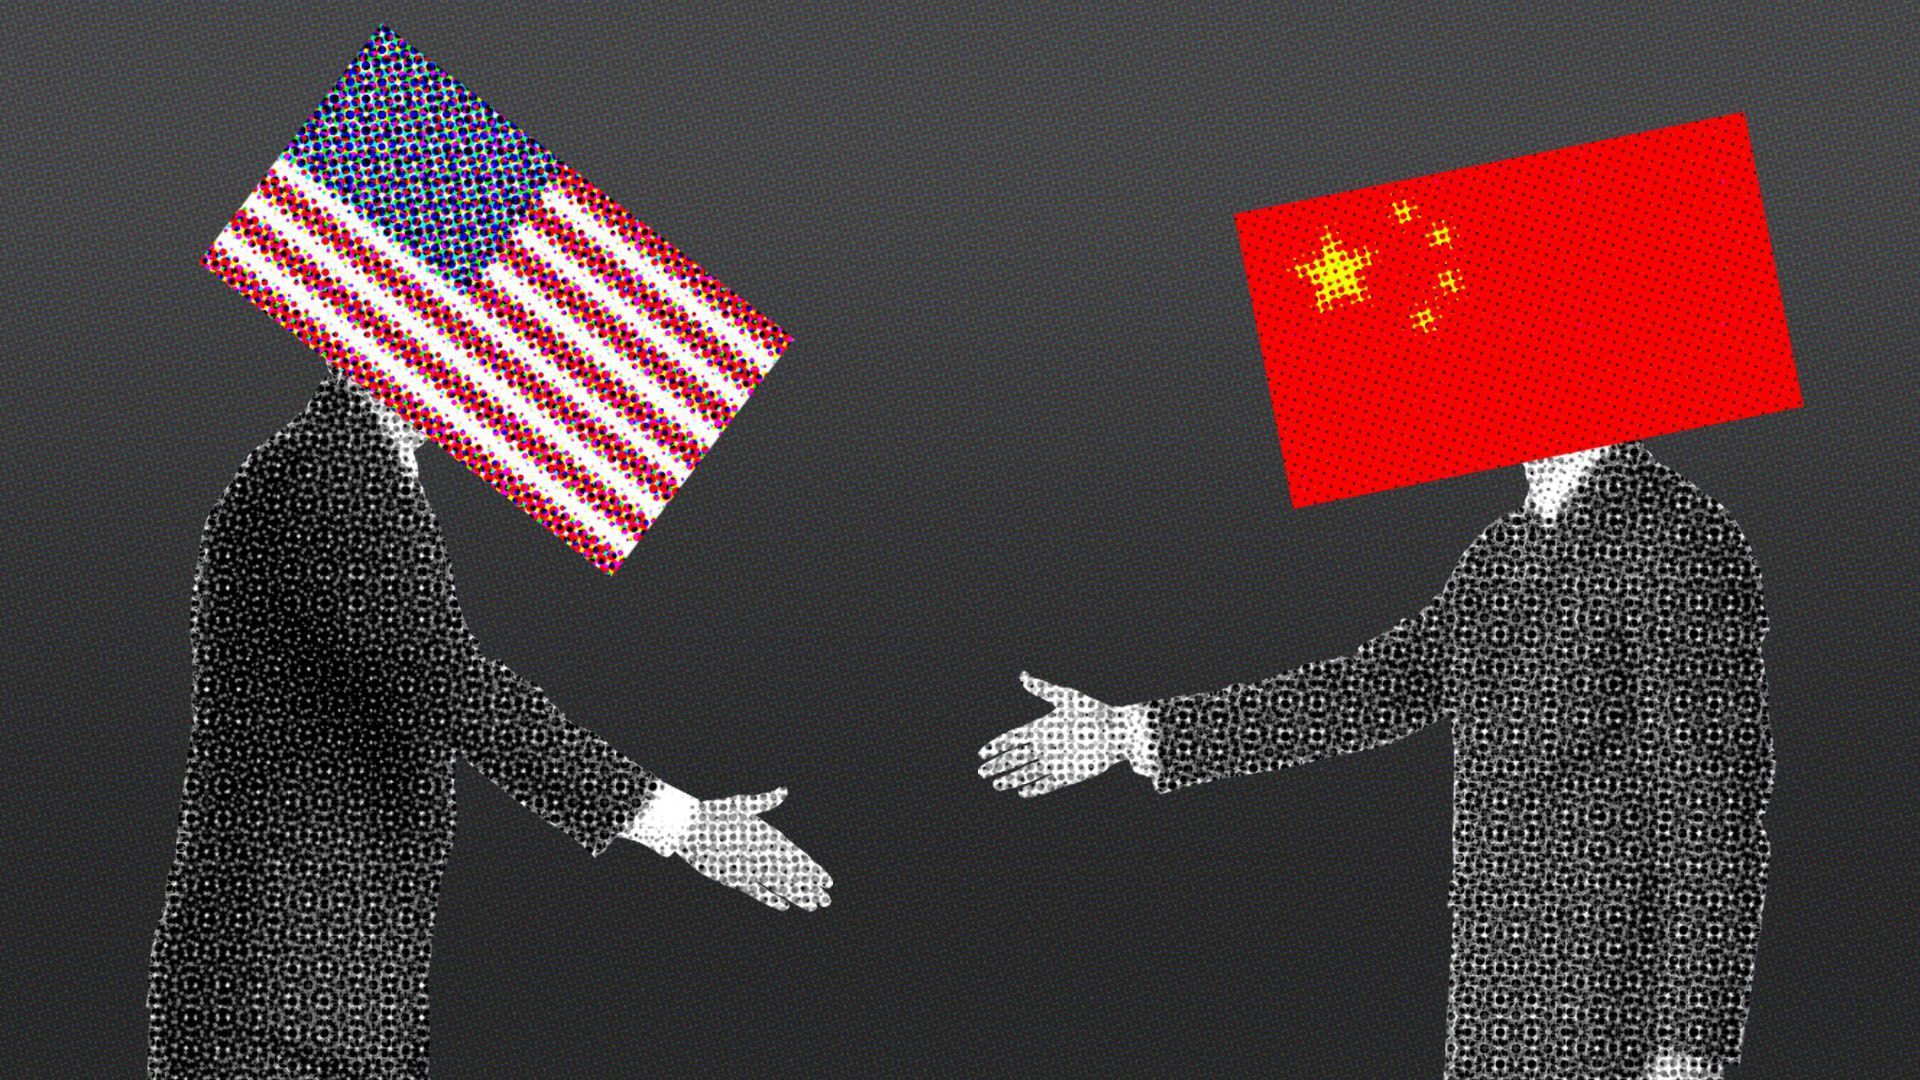 Illustration of two people about to shake hands and their heads have been replaced by the flag of the United States and the flag of China.